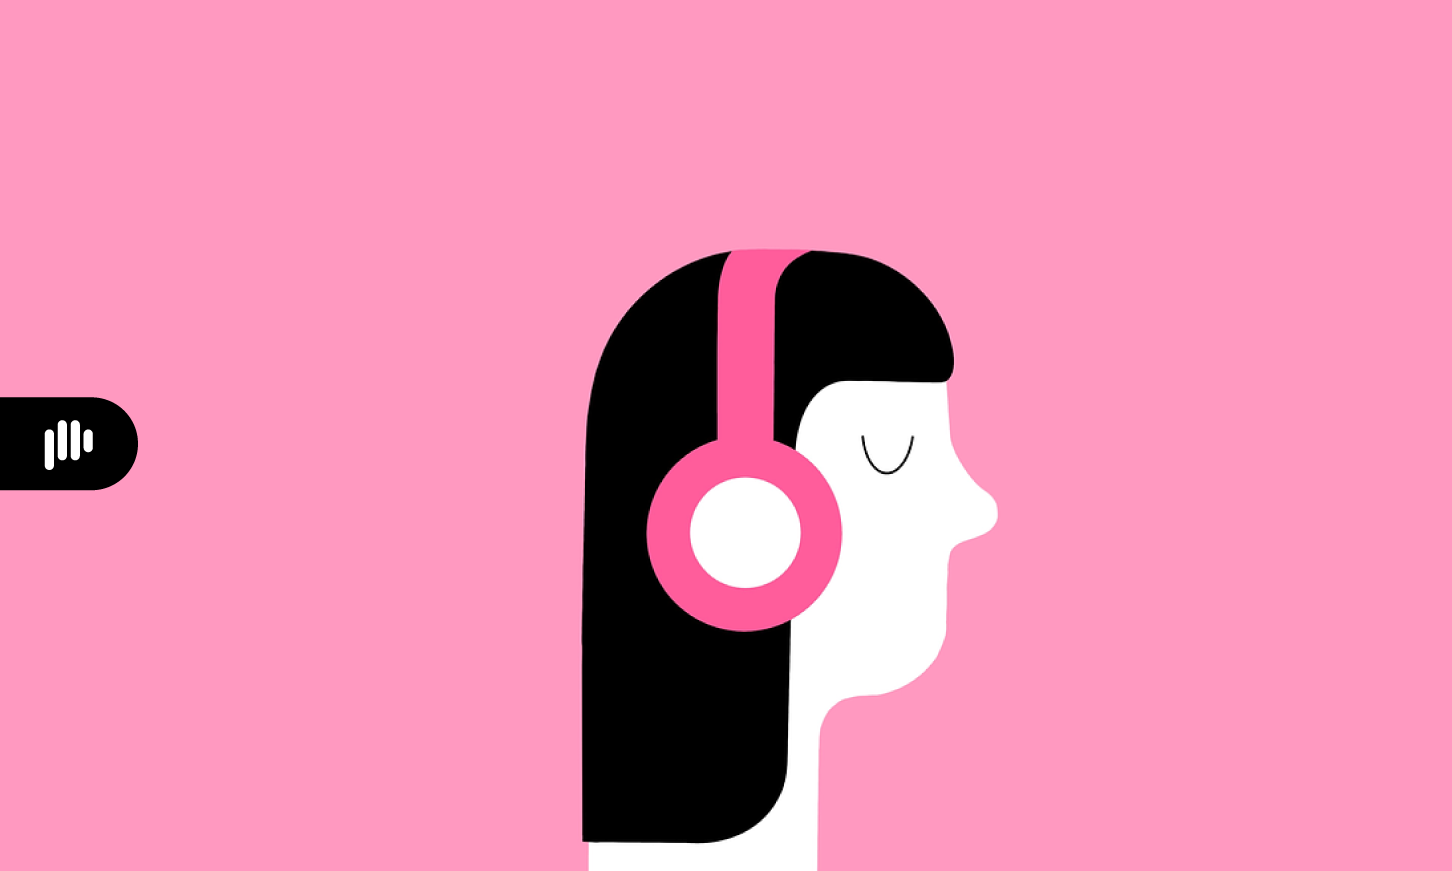 Storytelling Through Podcasts and Enhancing Mental Health